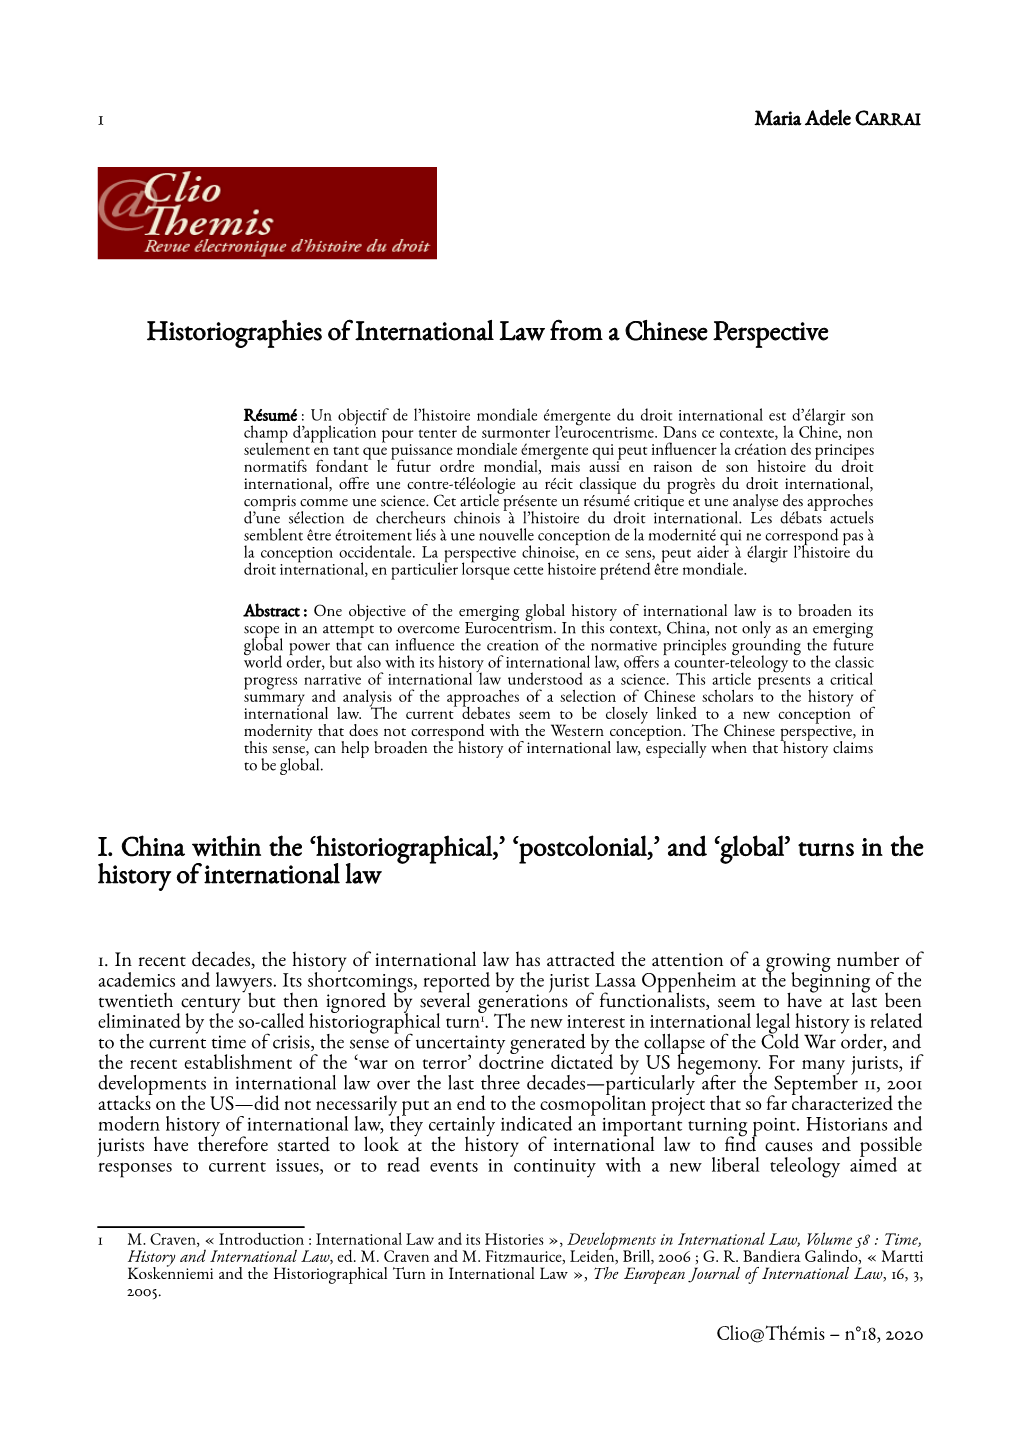 Historiographies of International Law from a Chinese Perspective I. China